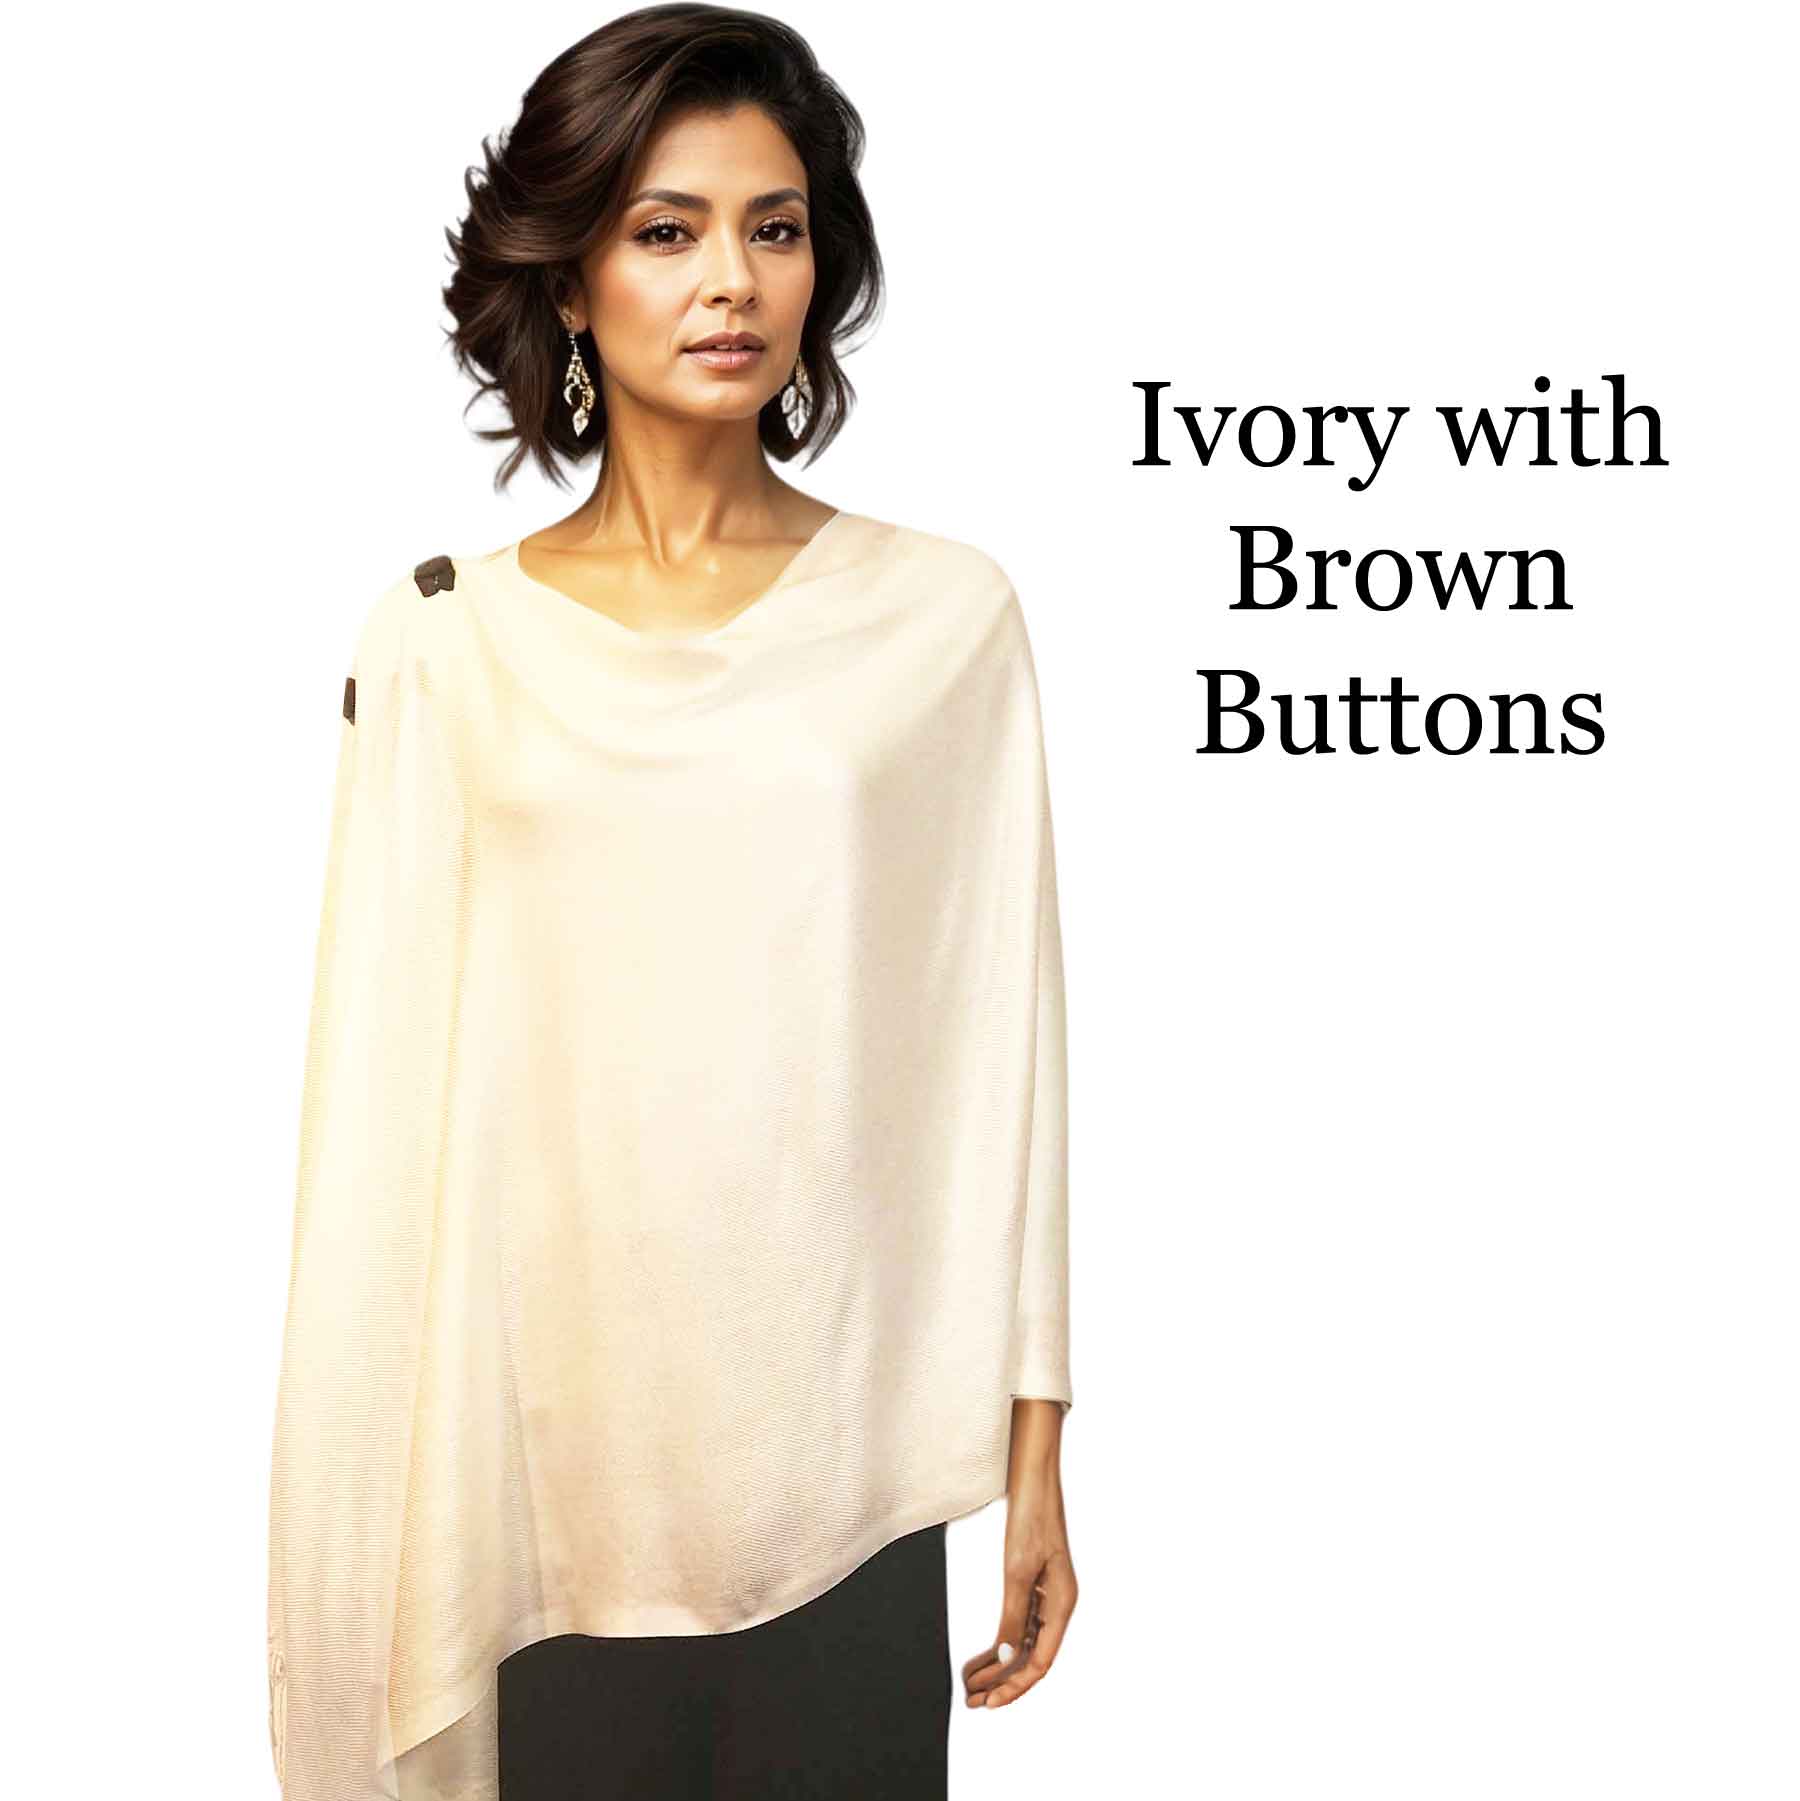 3866 - Pashmina Style Solid Color Button Shawls 3109 - Solid Light Gold<br>
Pashmina Style Button Shawl - 27